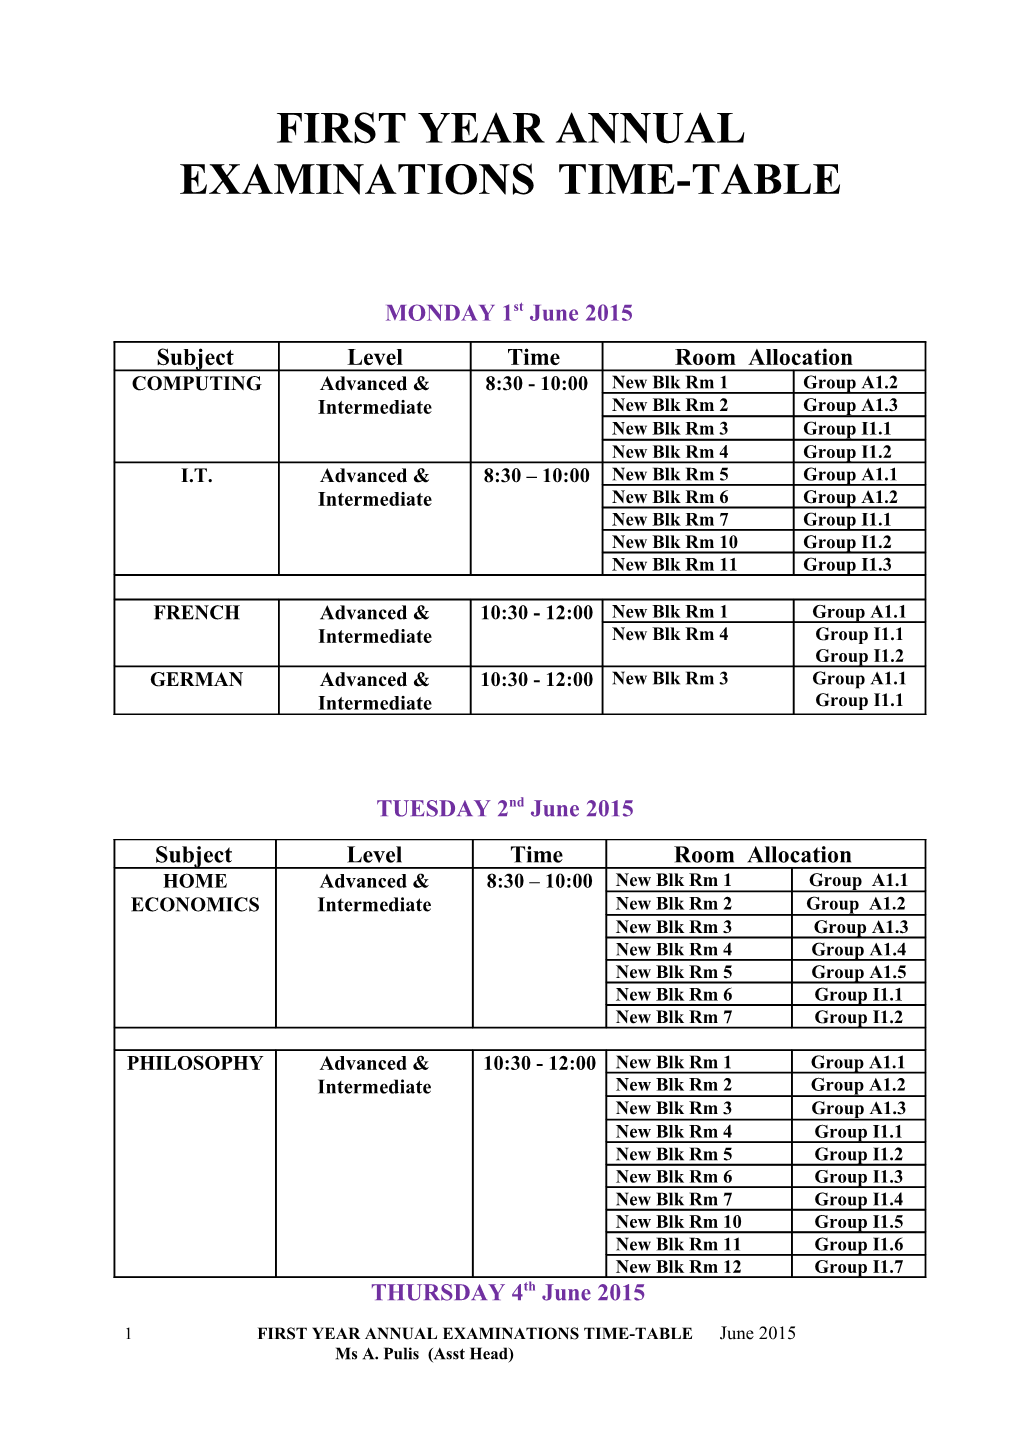 First Year Annual Examinations Time-Table